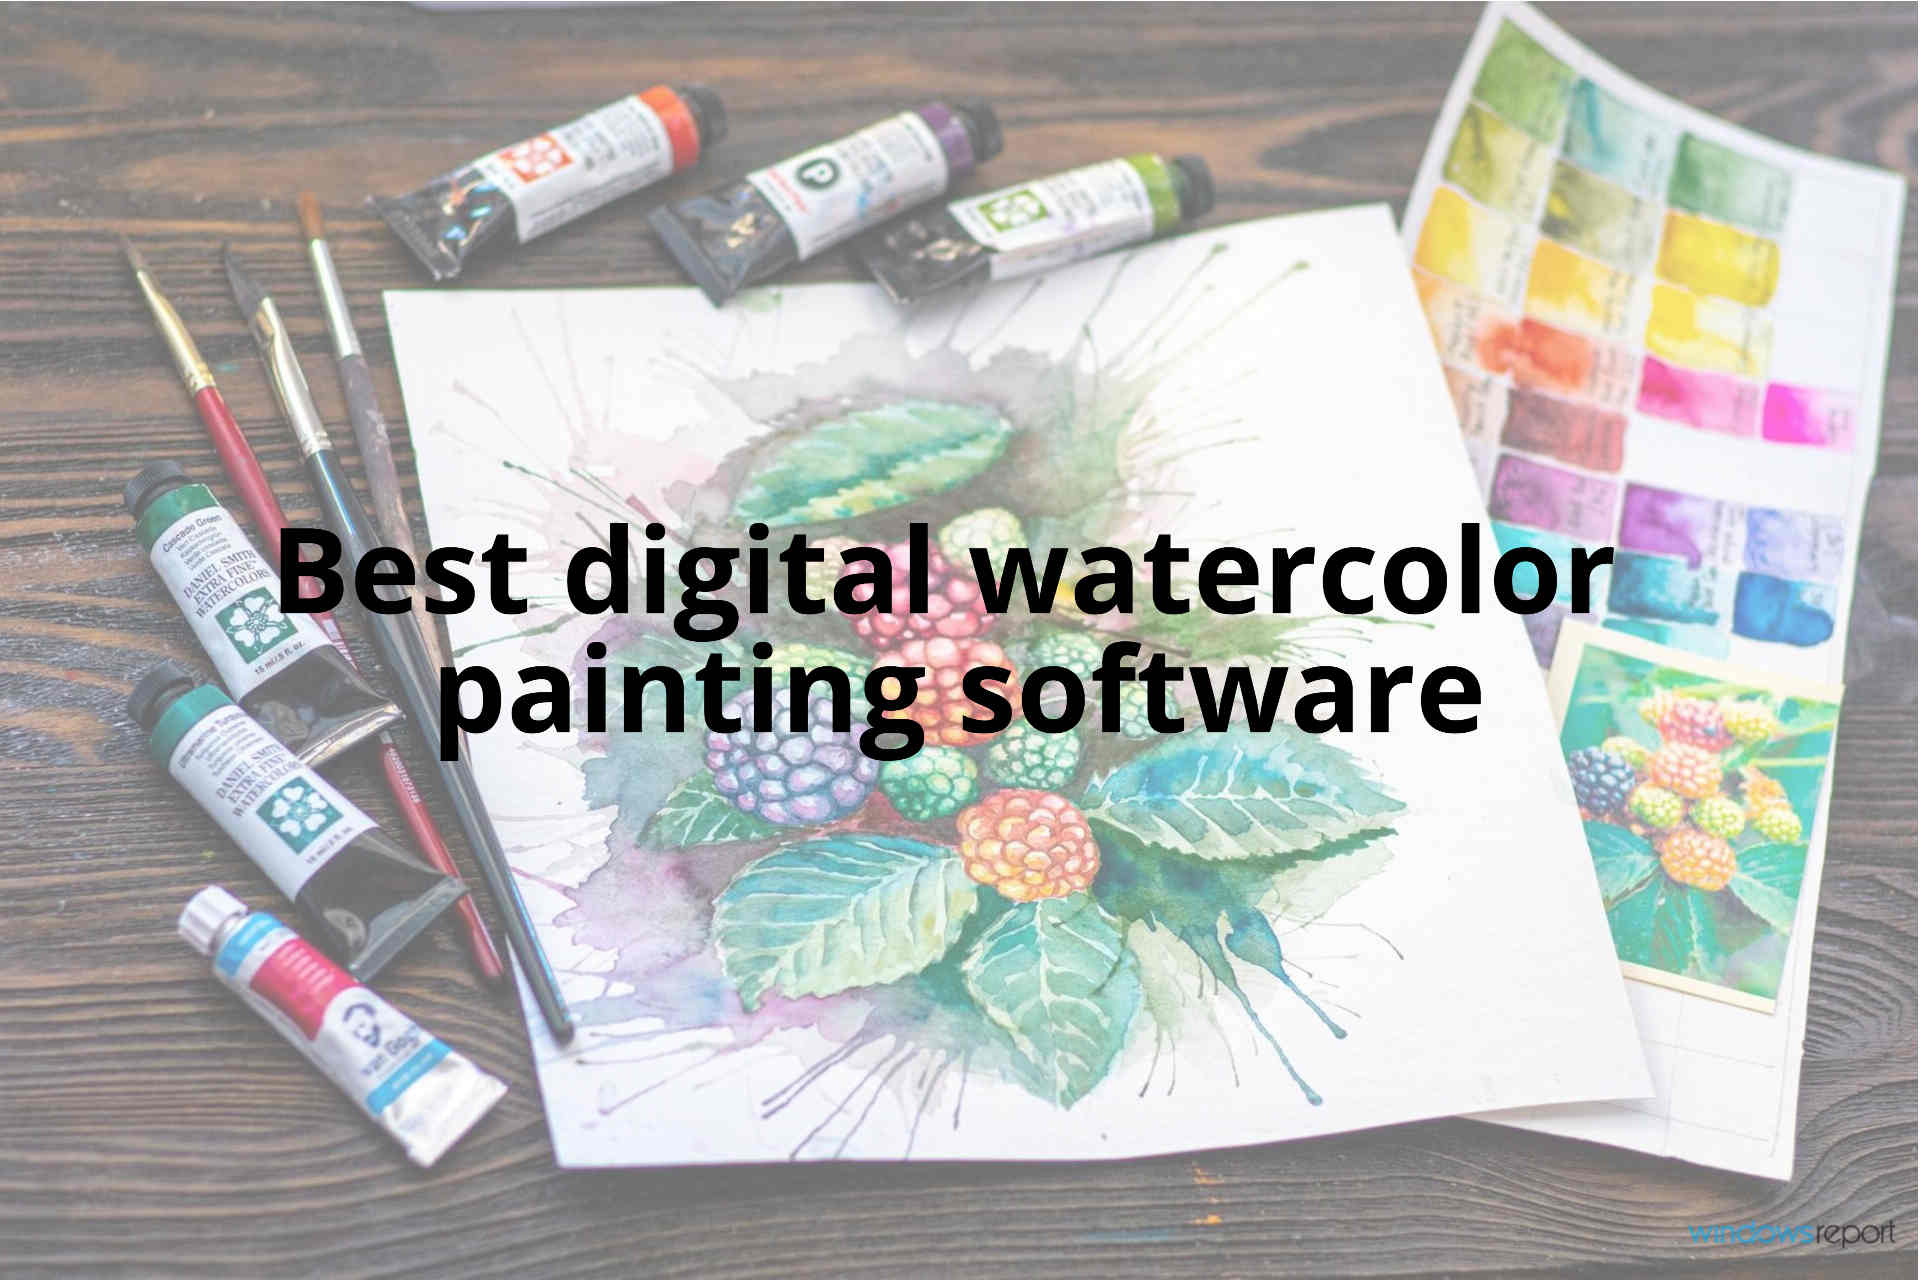 What are the best digital watercolor painting software